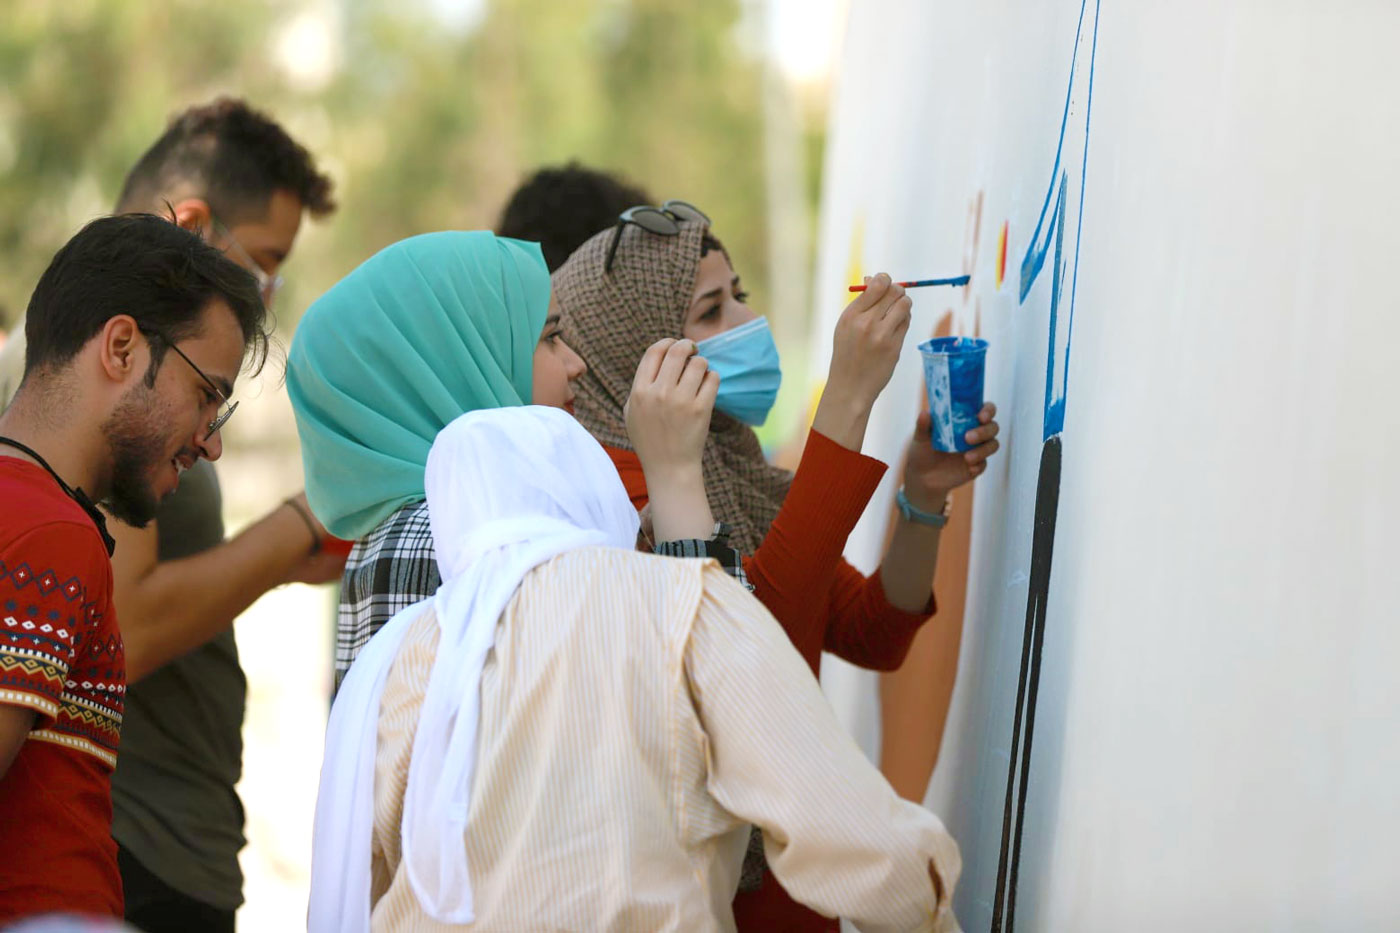 Young Jordanians painting a mural together on a wall